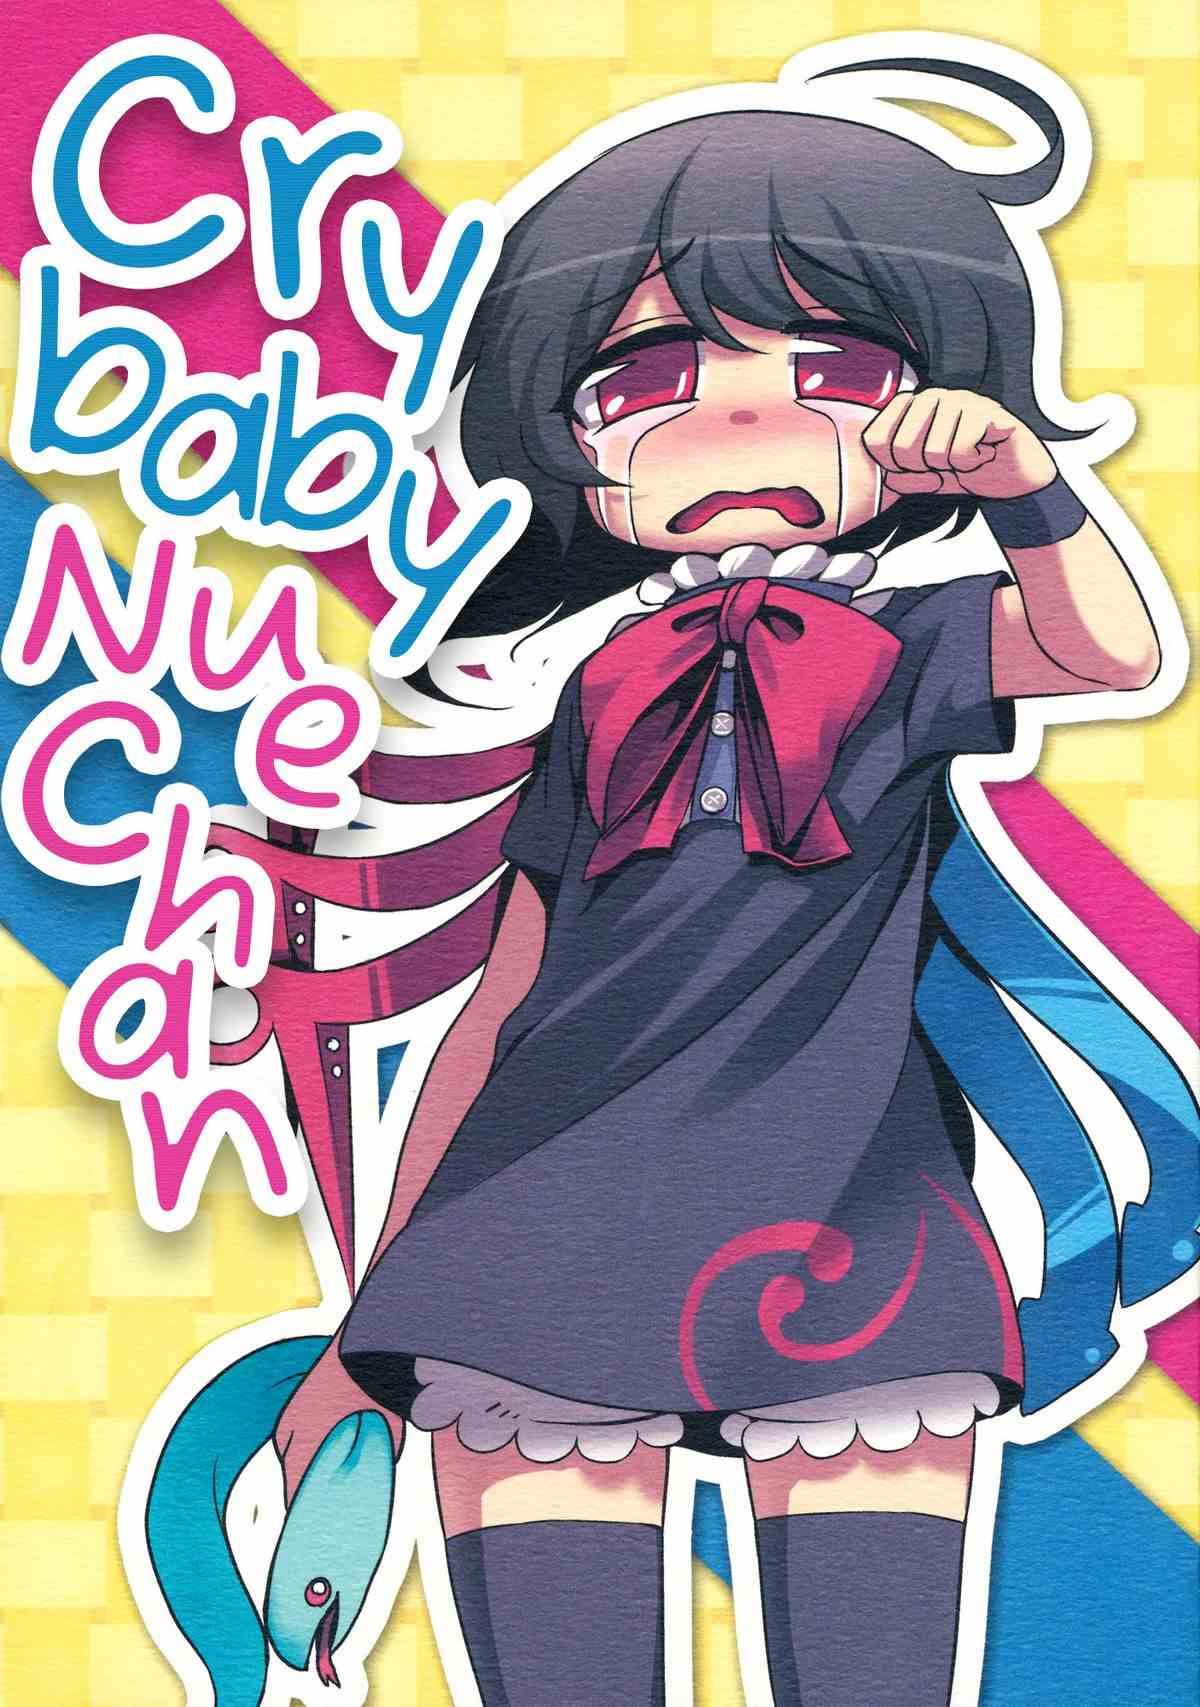 Cry baby Nue chan - 第1話 - 1